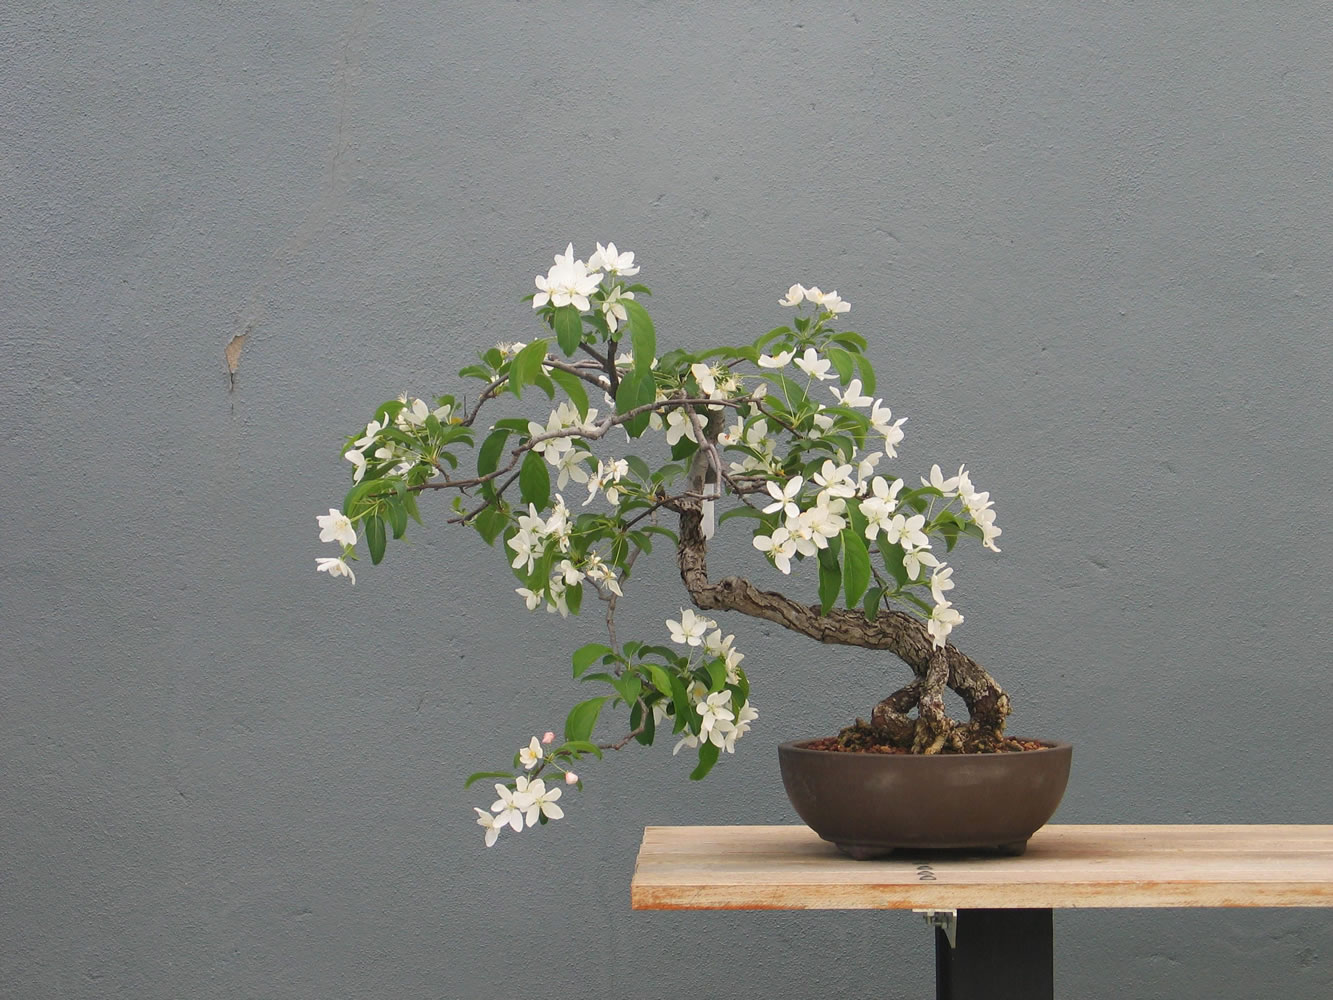 A Malus slant style bonsai in spring in New York.